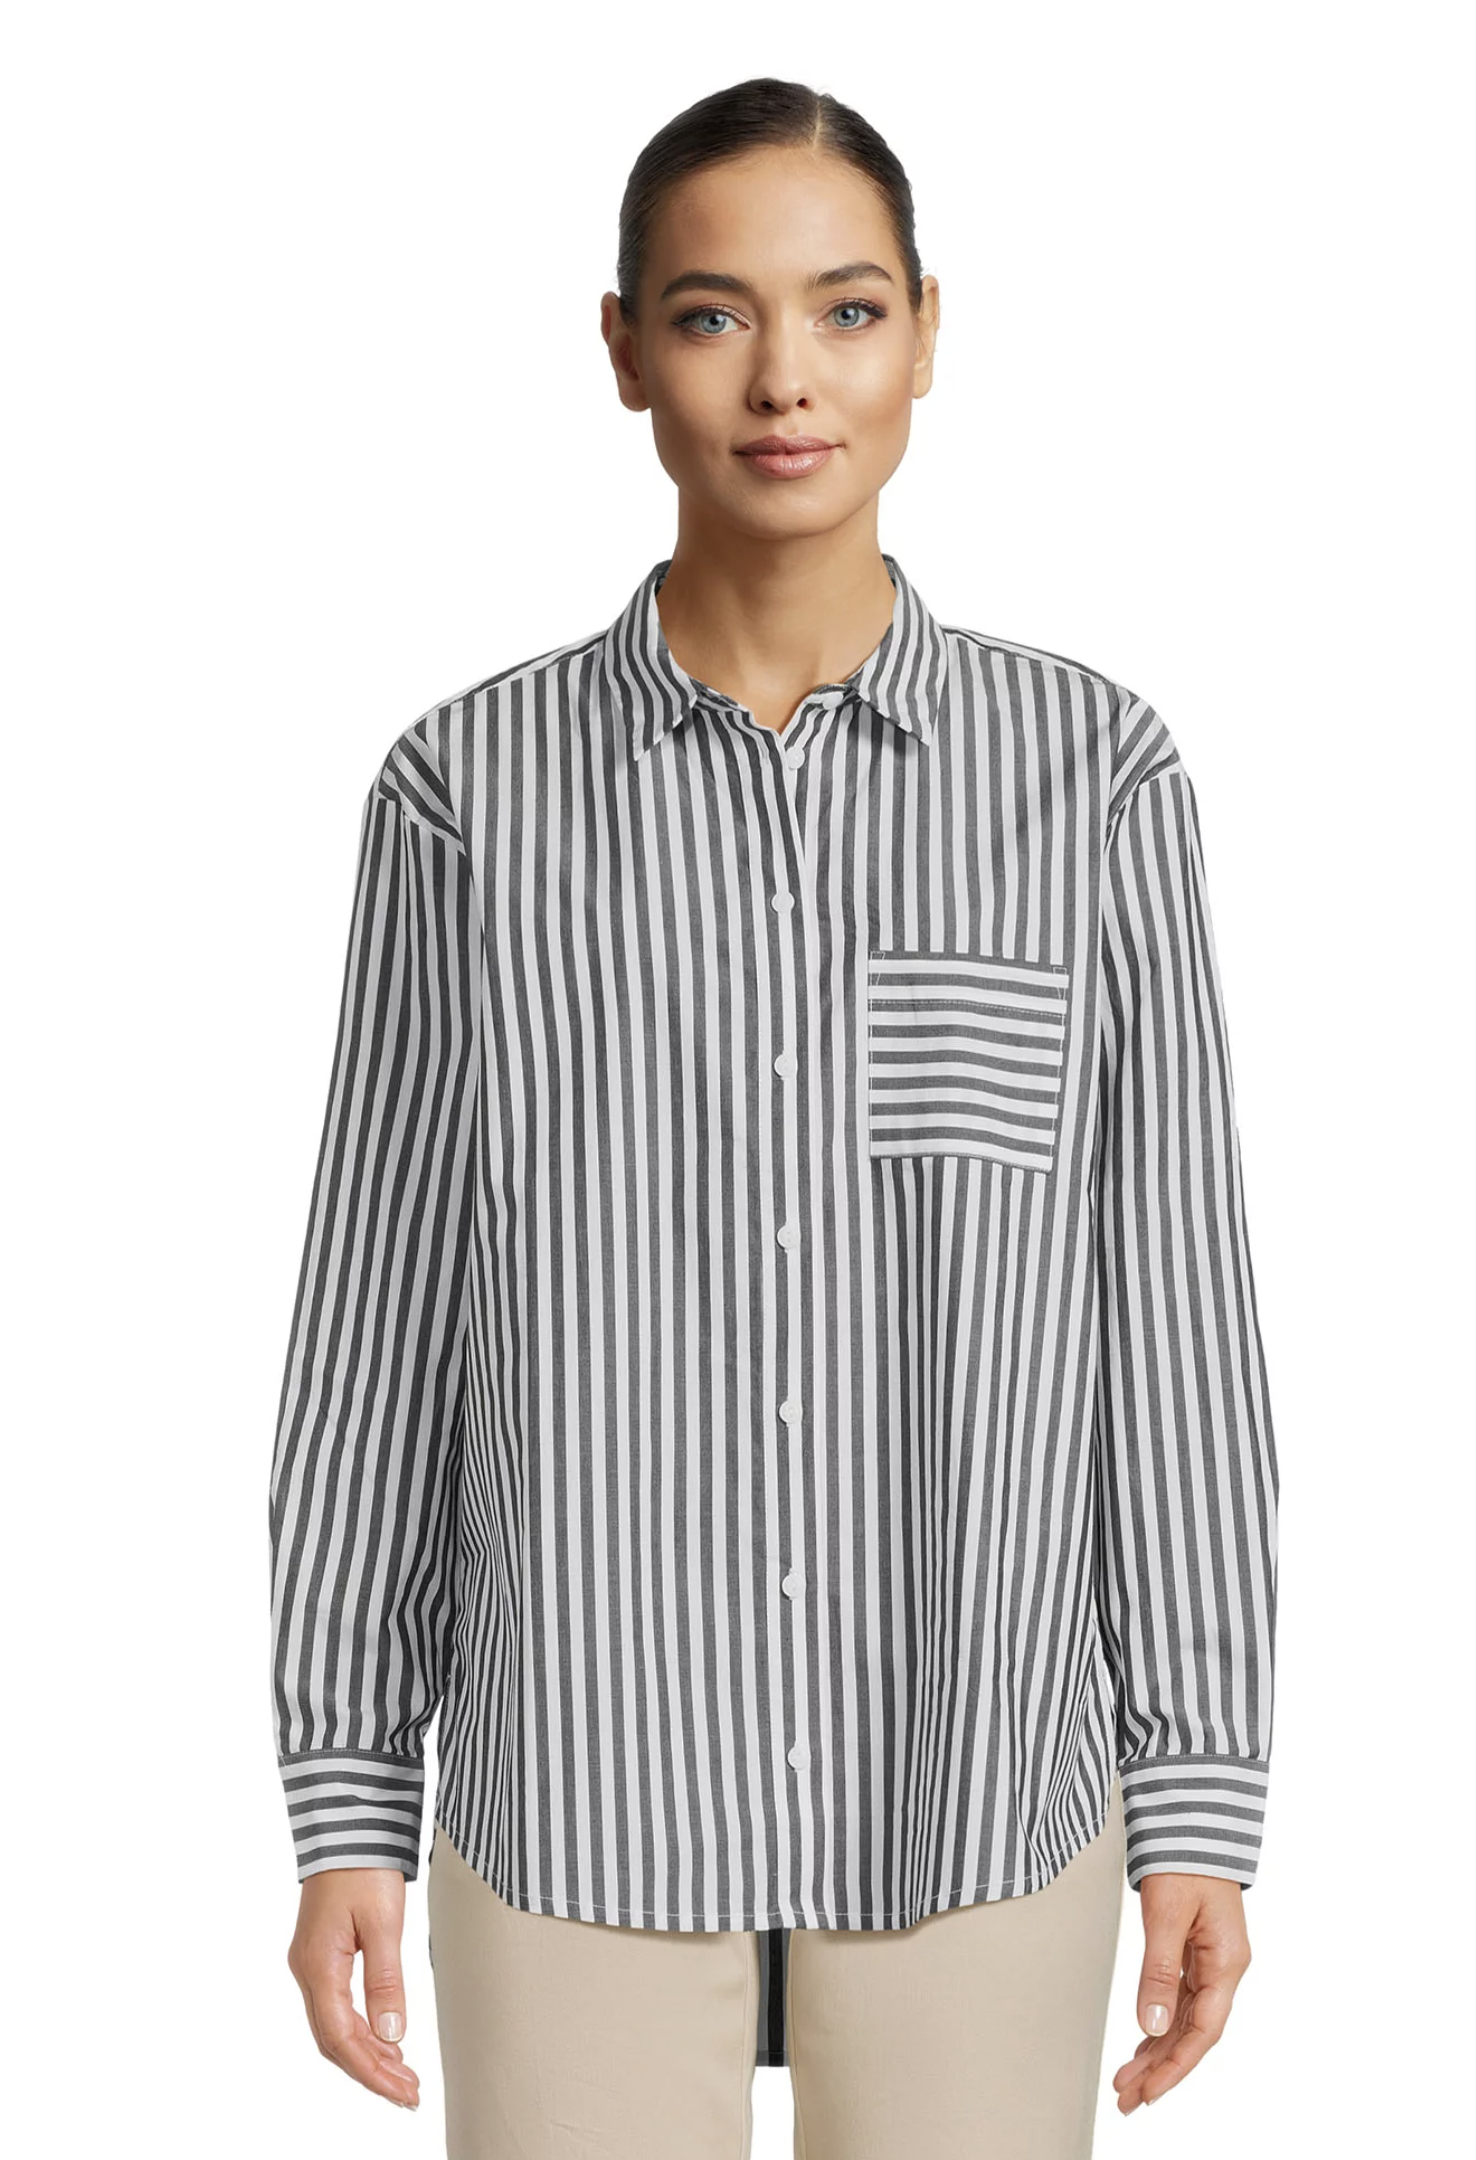 a model wearing the shirt in black and white stripes